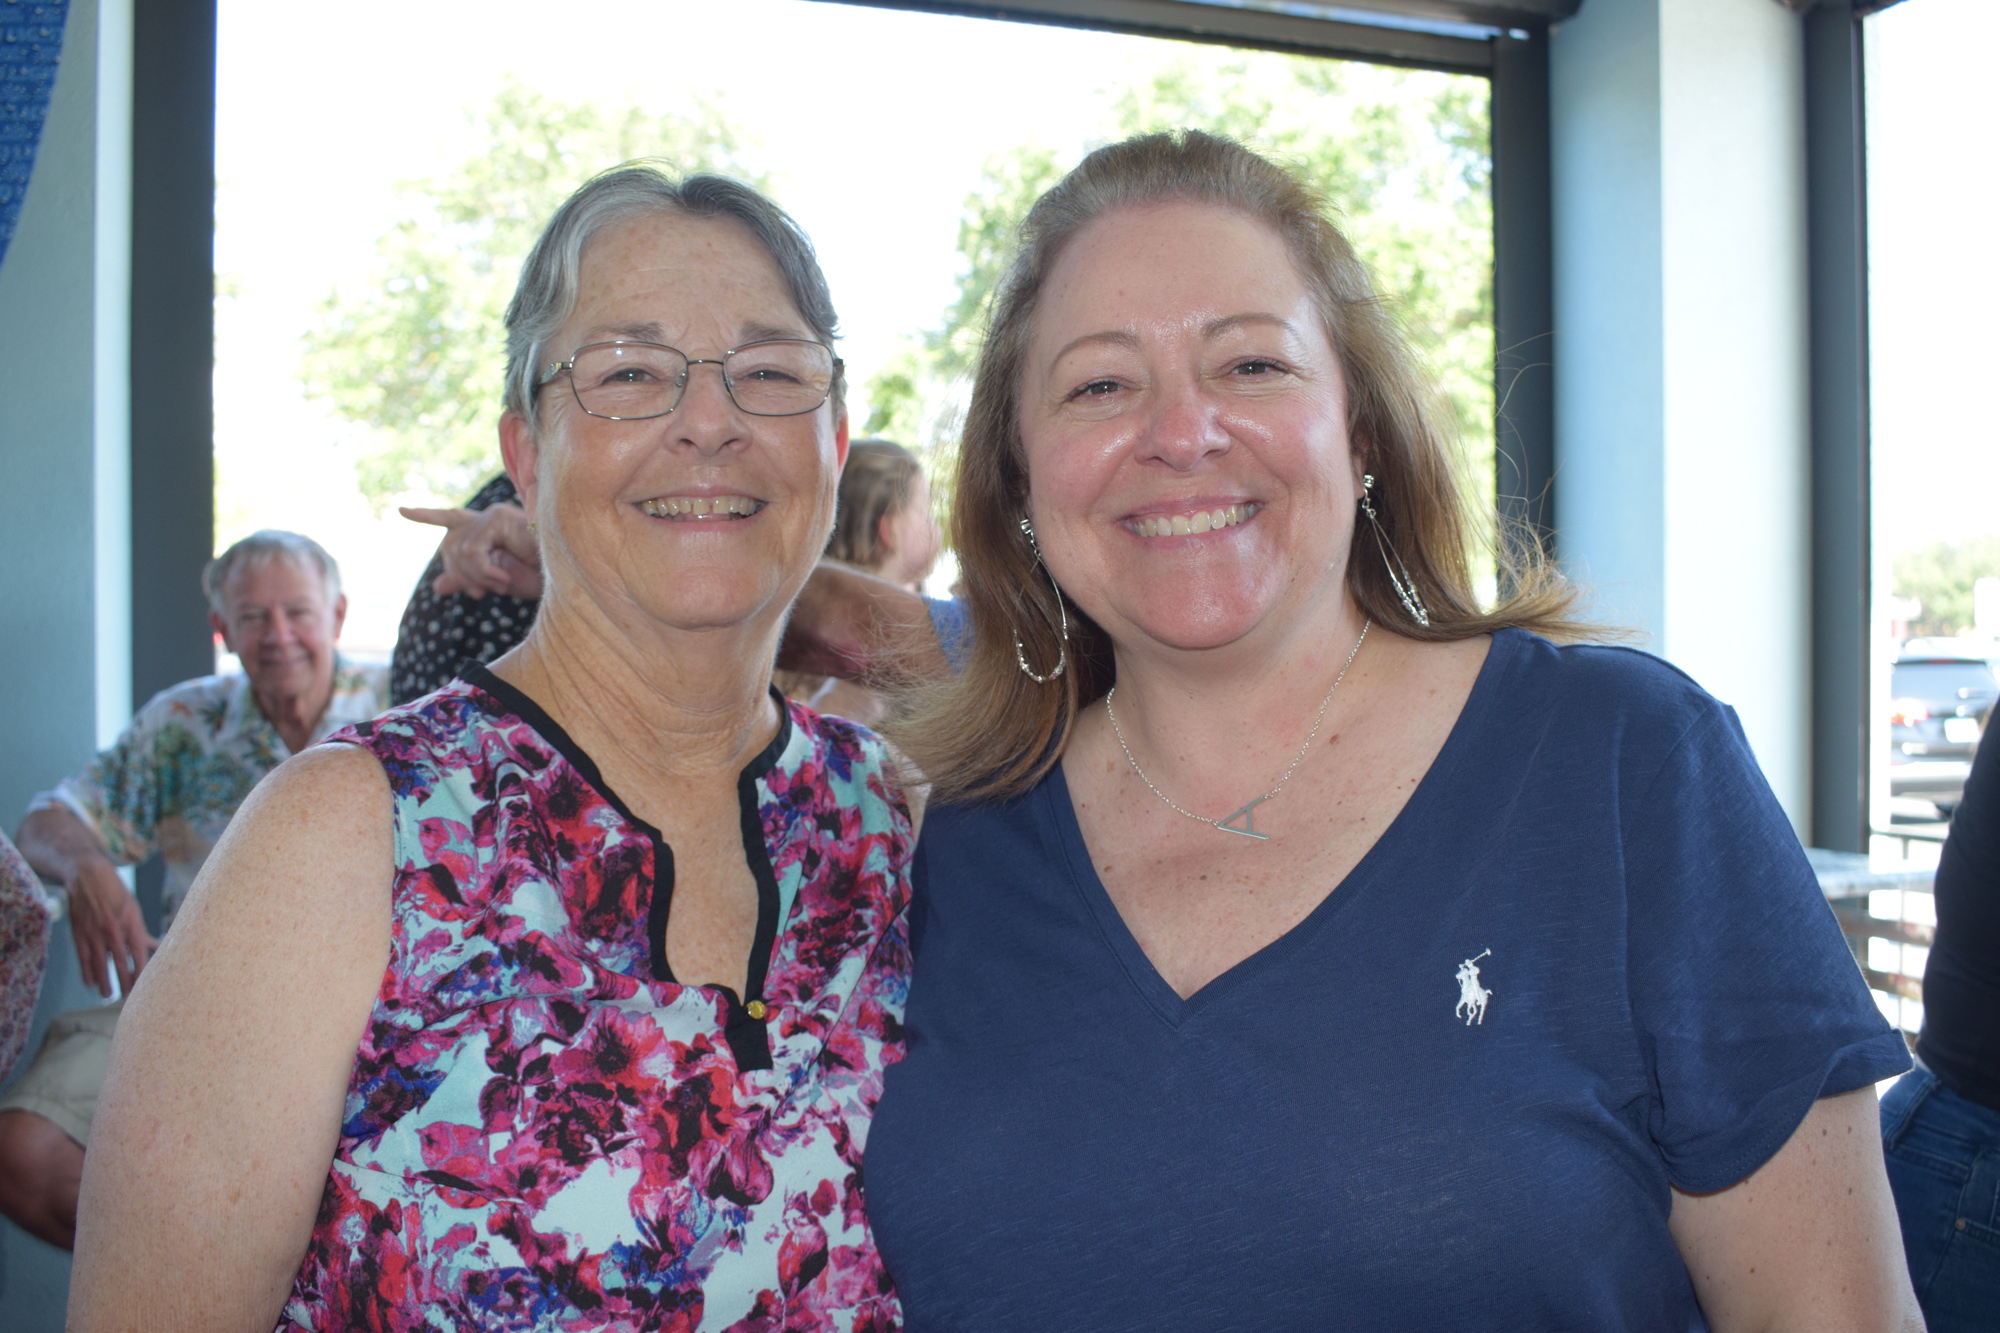 Candice DeLazzer, an English teacher at Lakewood Ranch High School, celebrates her retirement with Macie Adams, who was a cheerleader for DeLazzer at Southeast High School before becoming a colleague of DeLazzer's.